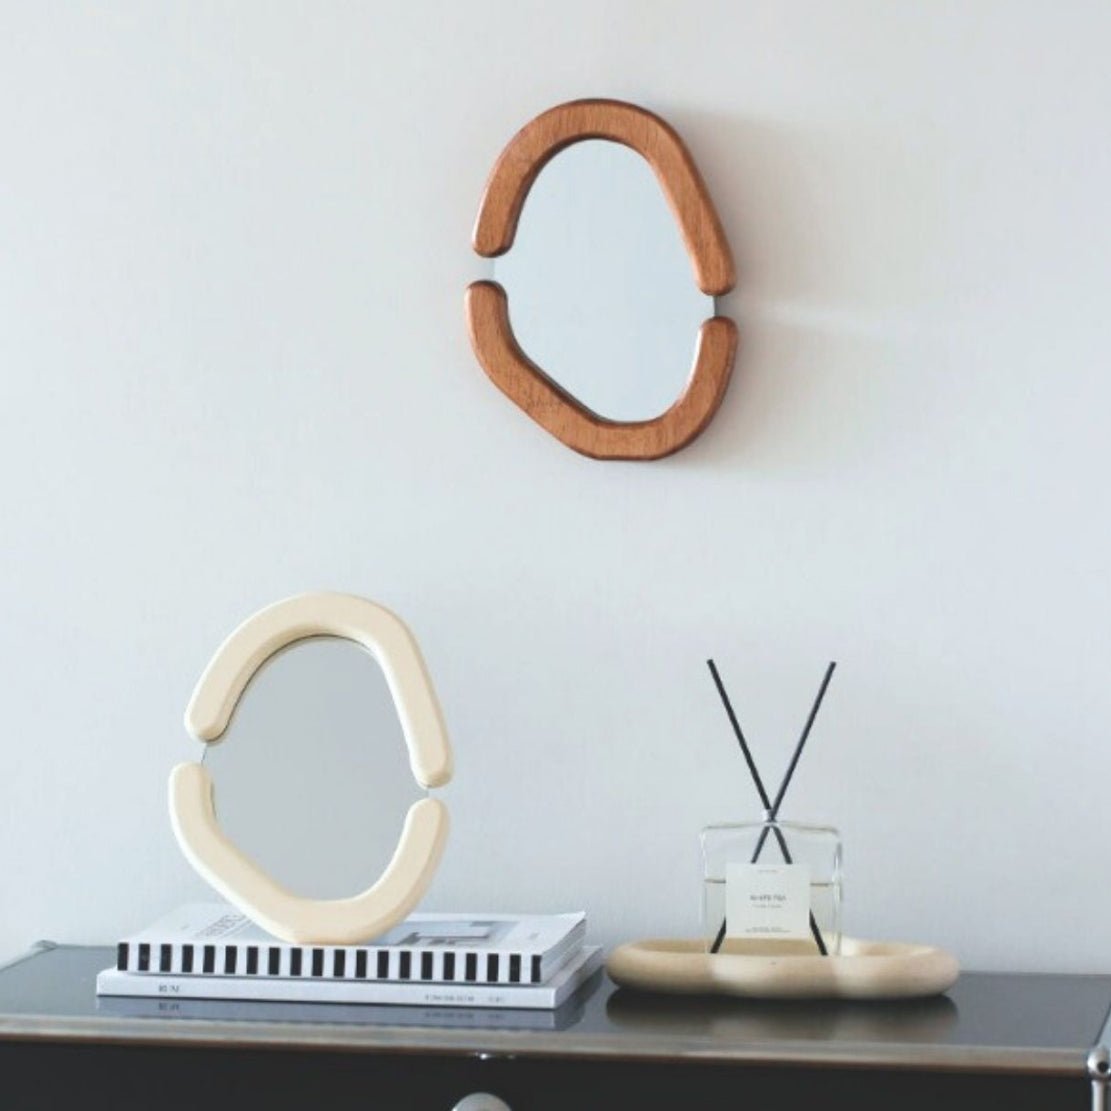 Asymmetrical wood frame decorative mirrors in brown & white